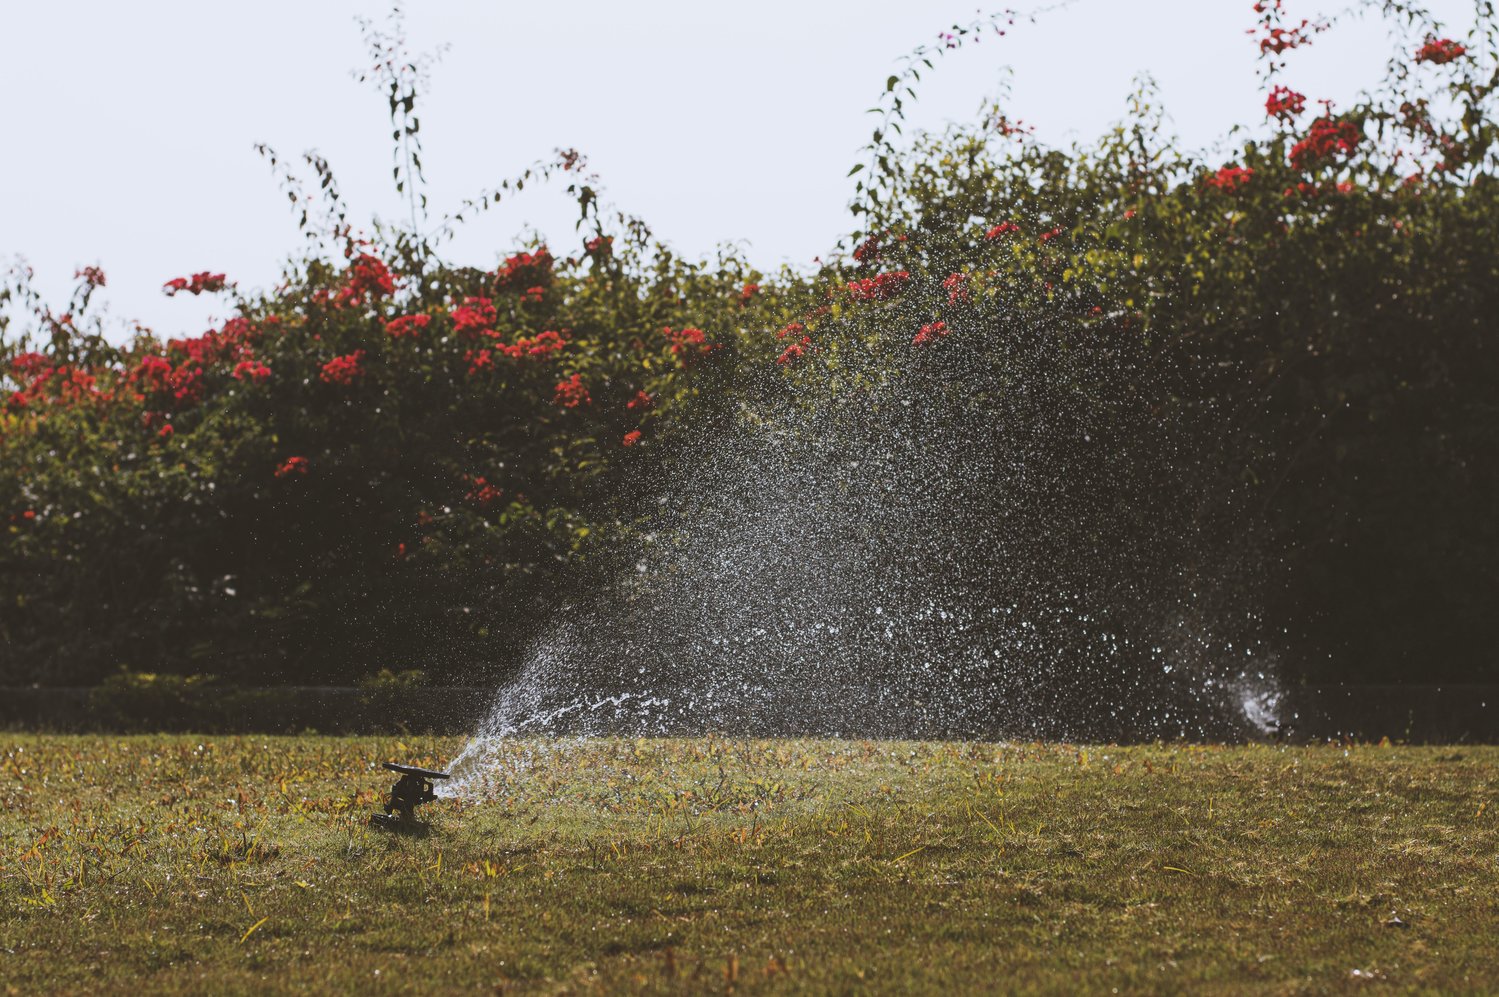 The City of Katy has imposed stage 3 mandatory water restrictions. Under these restrictions, landscape watering can be done only twice a week.